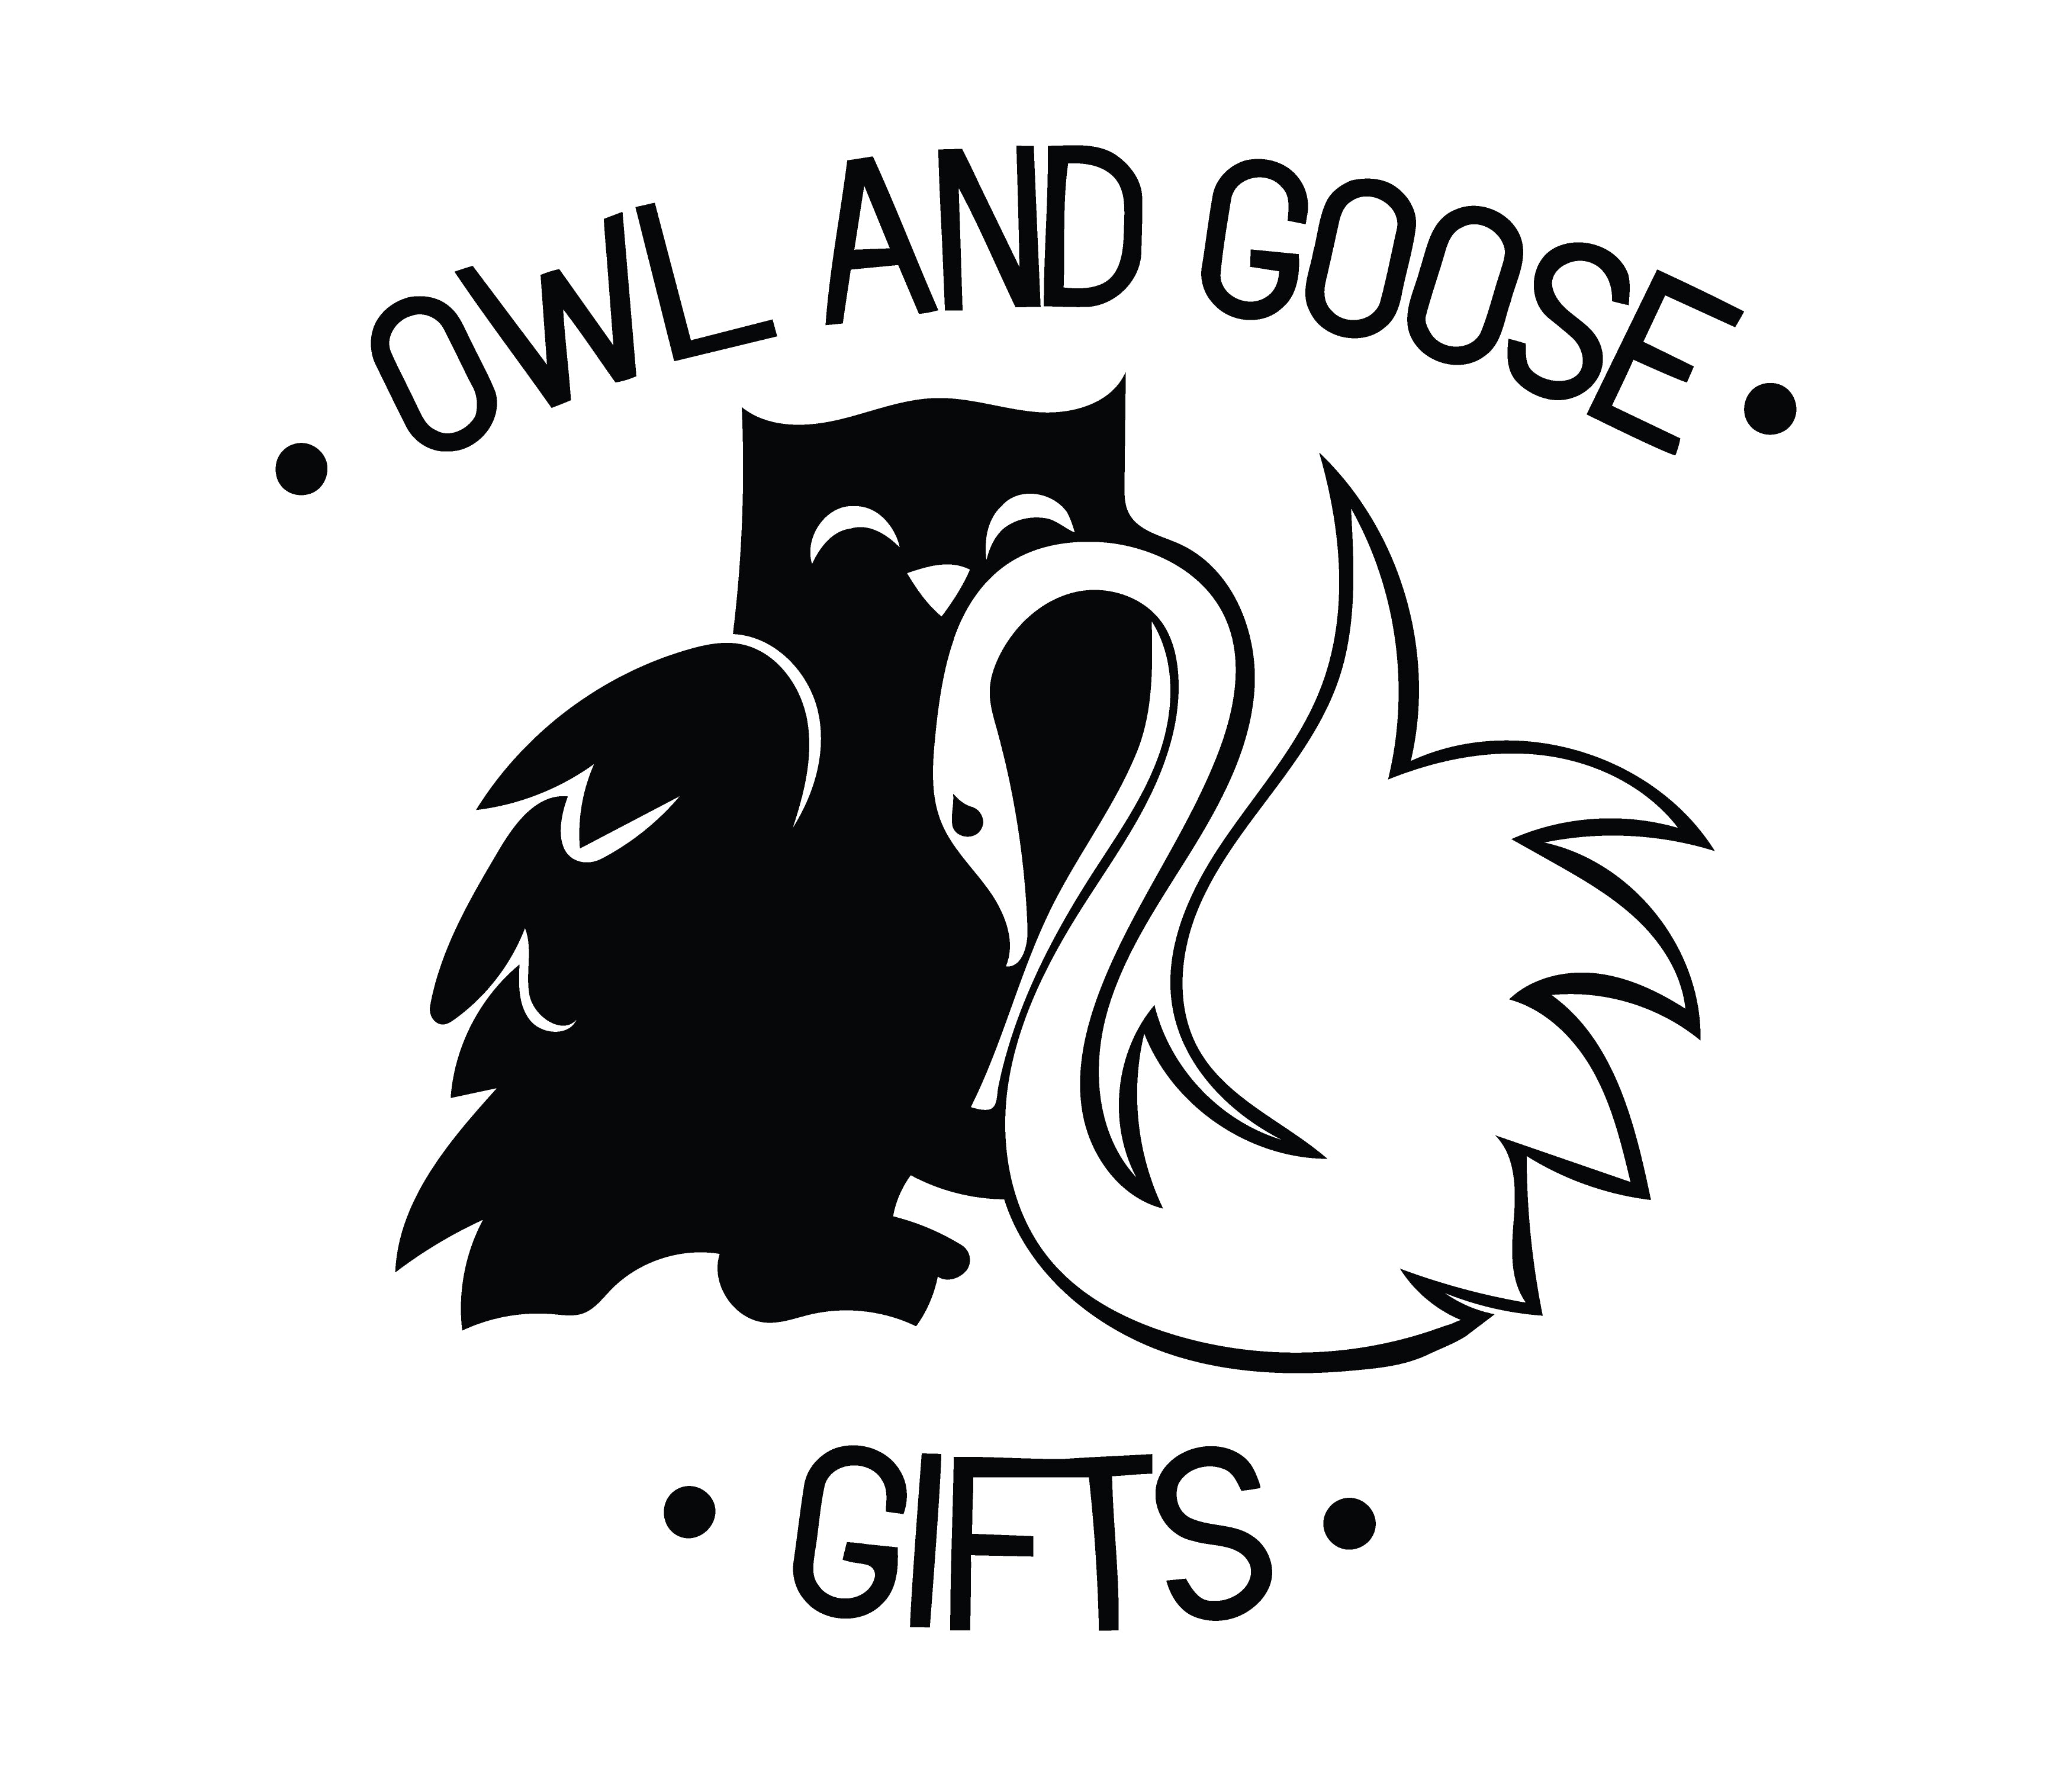 Owl And Goose Gifts - Sustainable, Quality Toys For Children Of All Ages